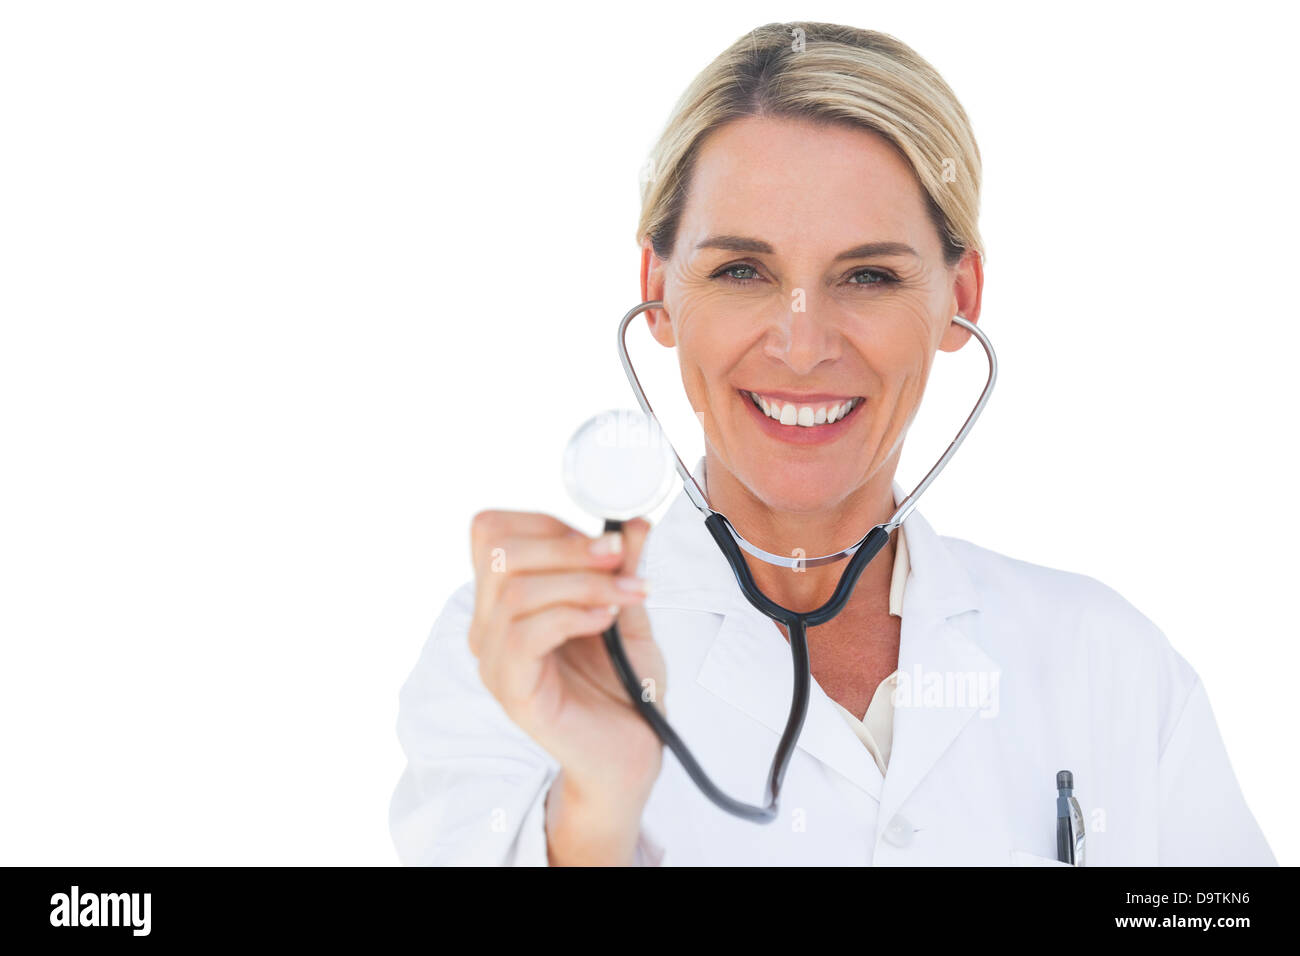 Cheerful doctor with stethoscope Banque D'Images